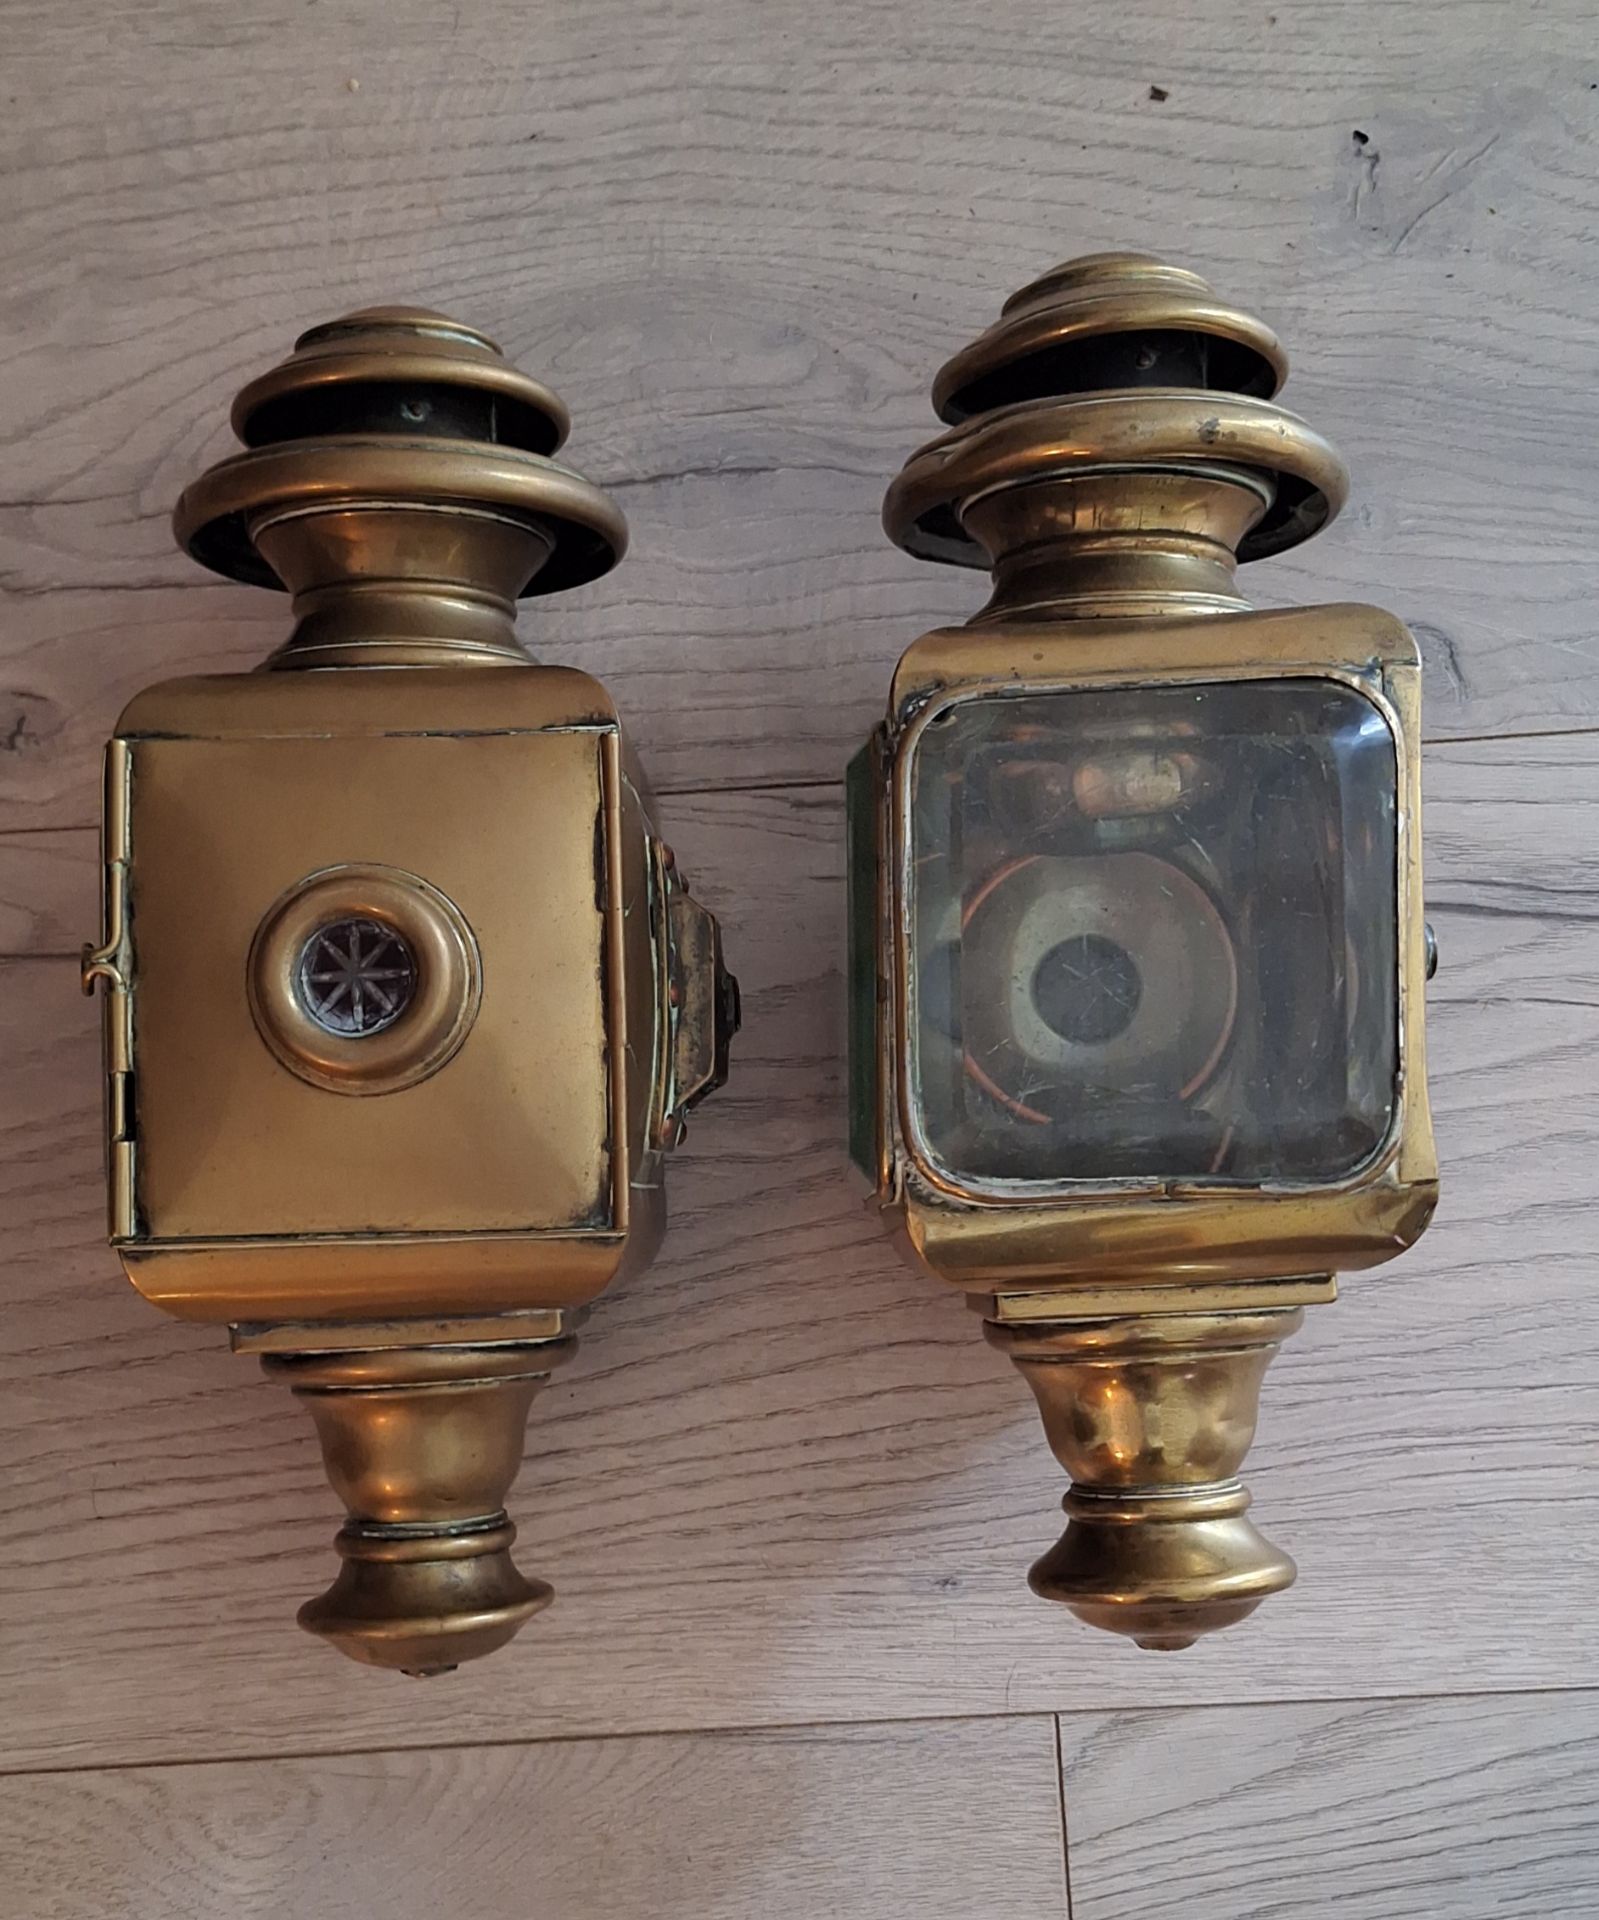 Old and rare carriage lamps, Besnard 1732.